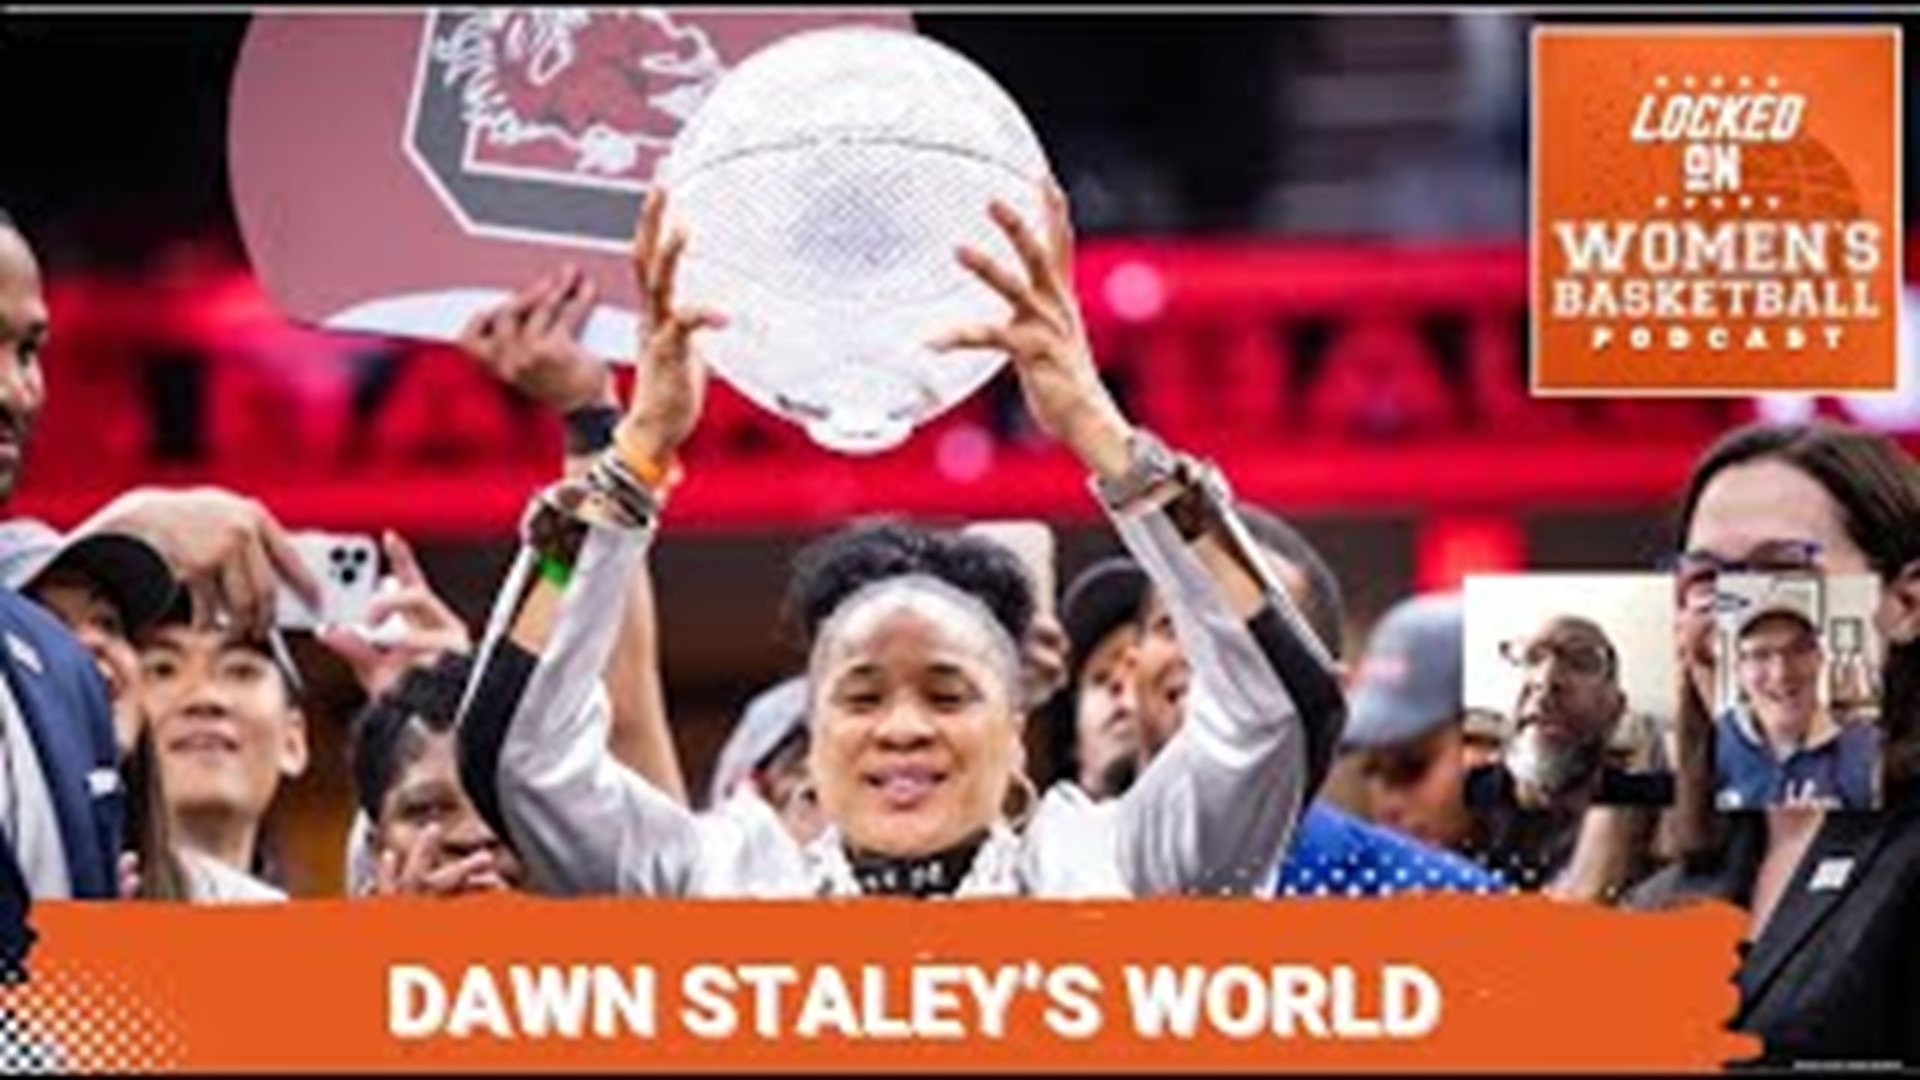 Dawn Staley's approach to life manifests itself in many ways. South Carolina's latest three-year run, including three Final Fours, two titles and in 2023-24, a title